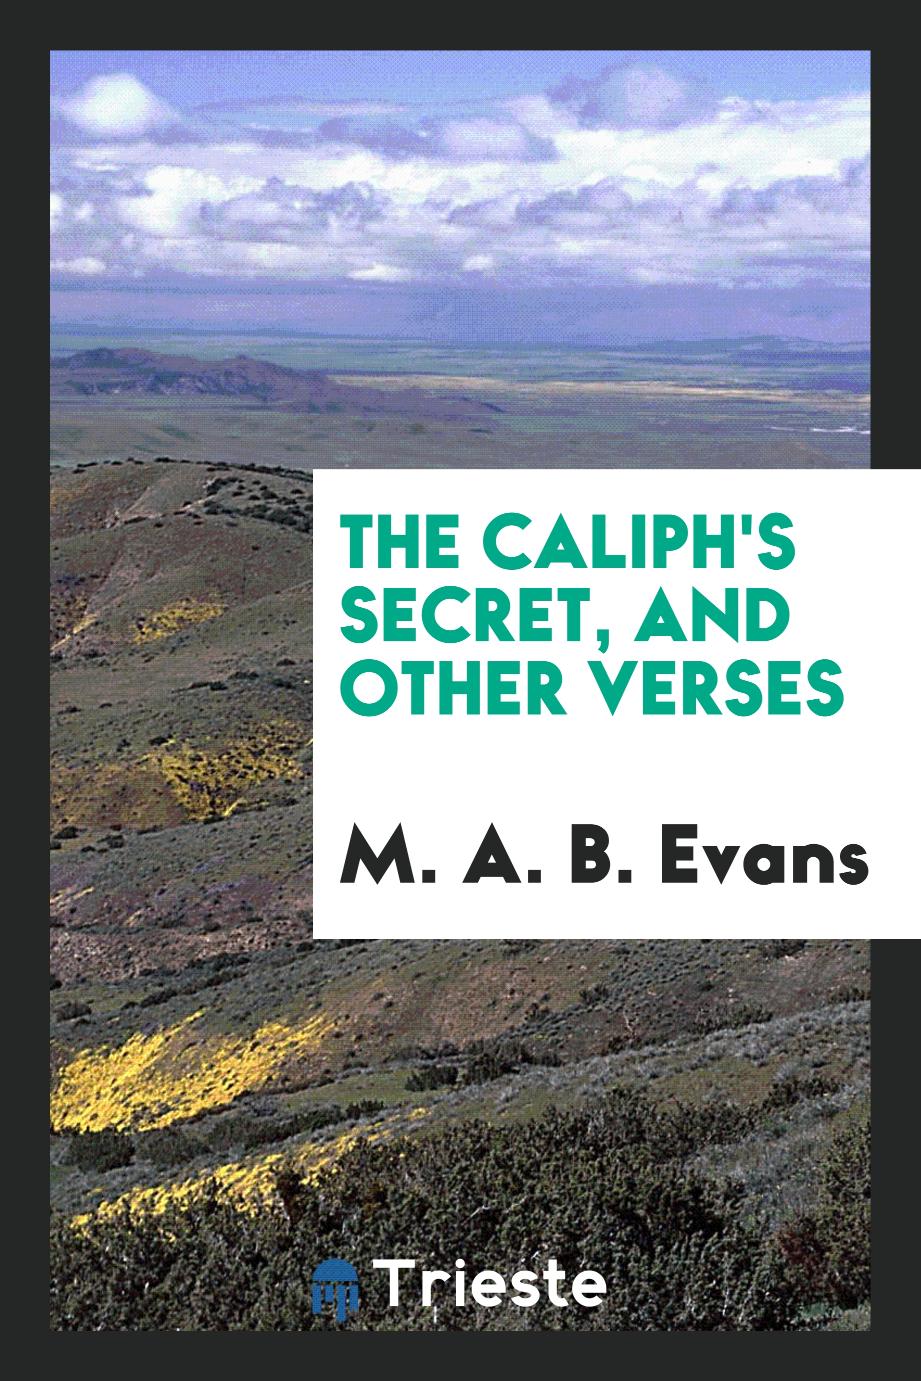 The Caliph's secret, and other verses